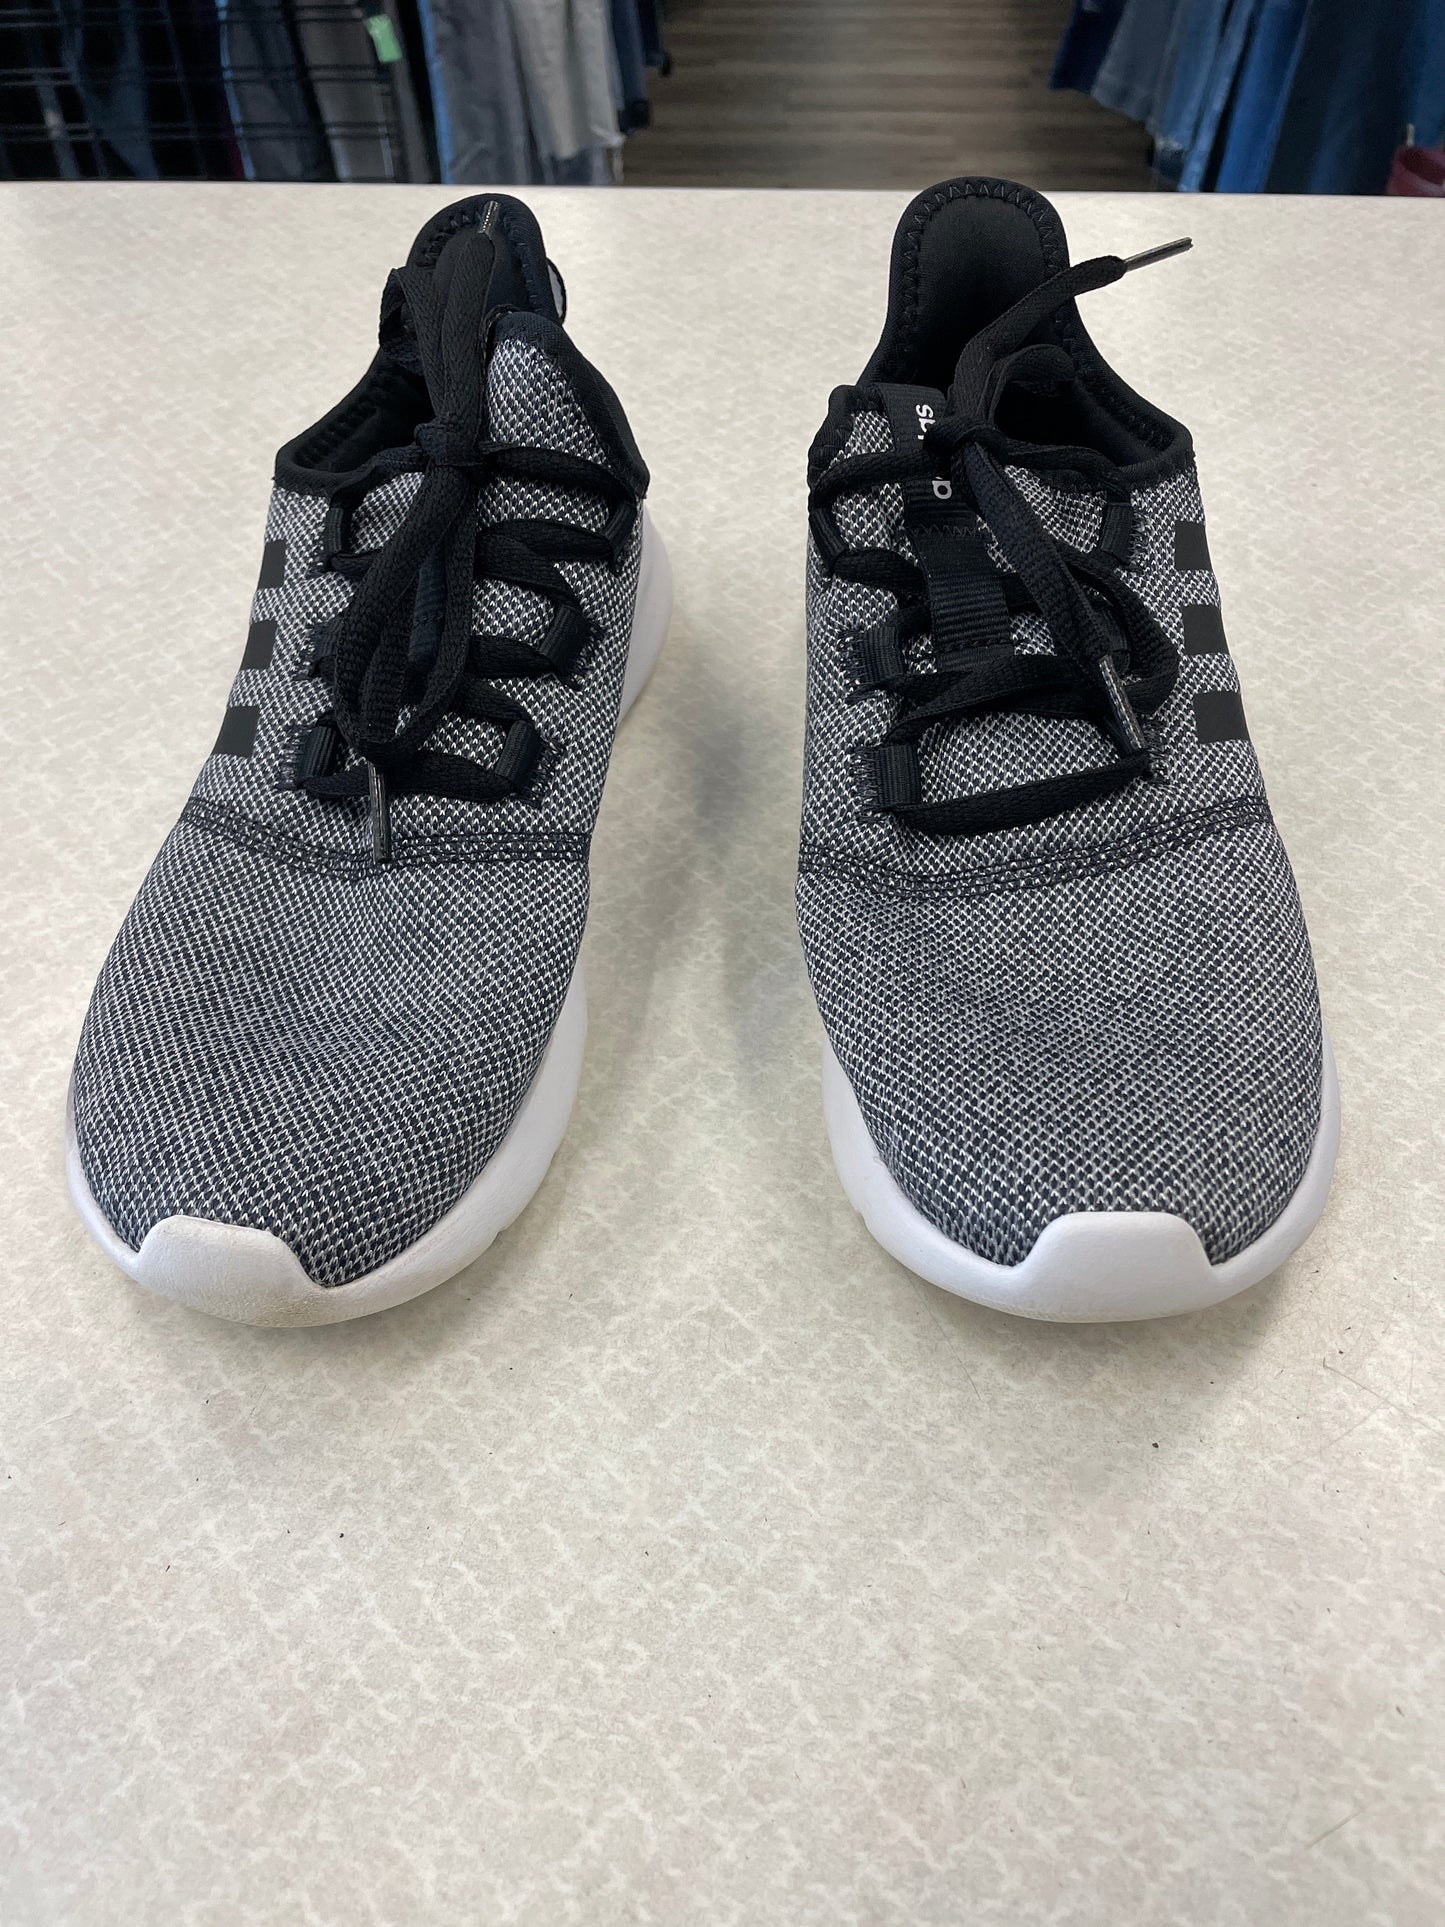 Black & Grey Shoes Sneakers Adidas, Size 8